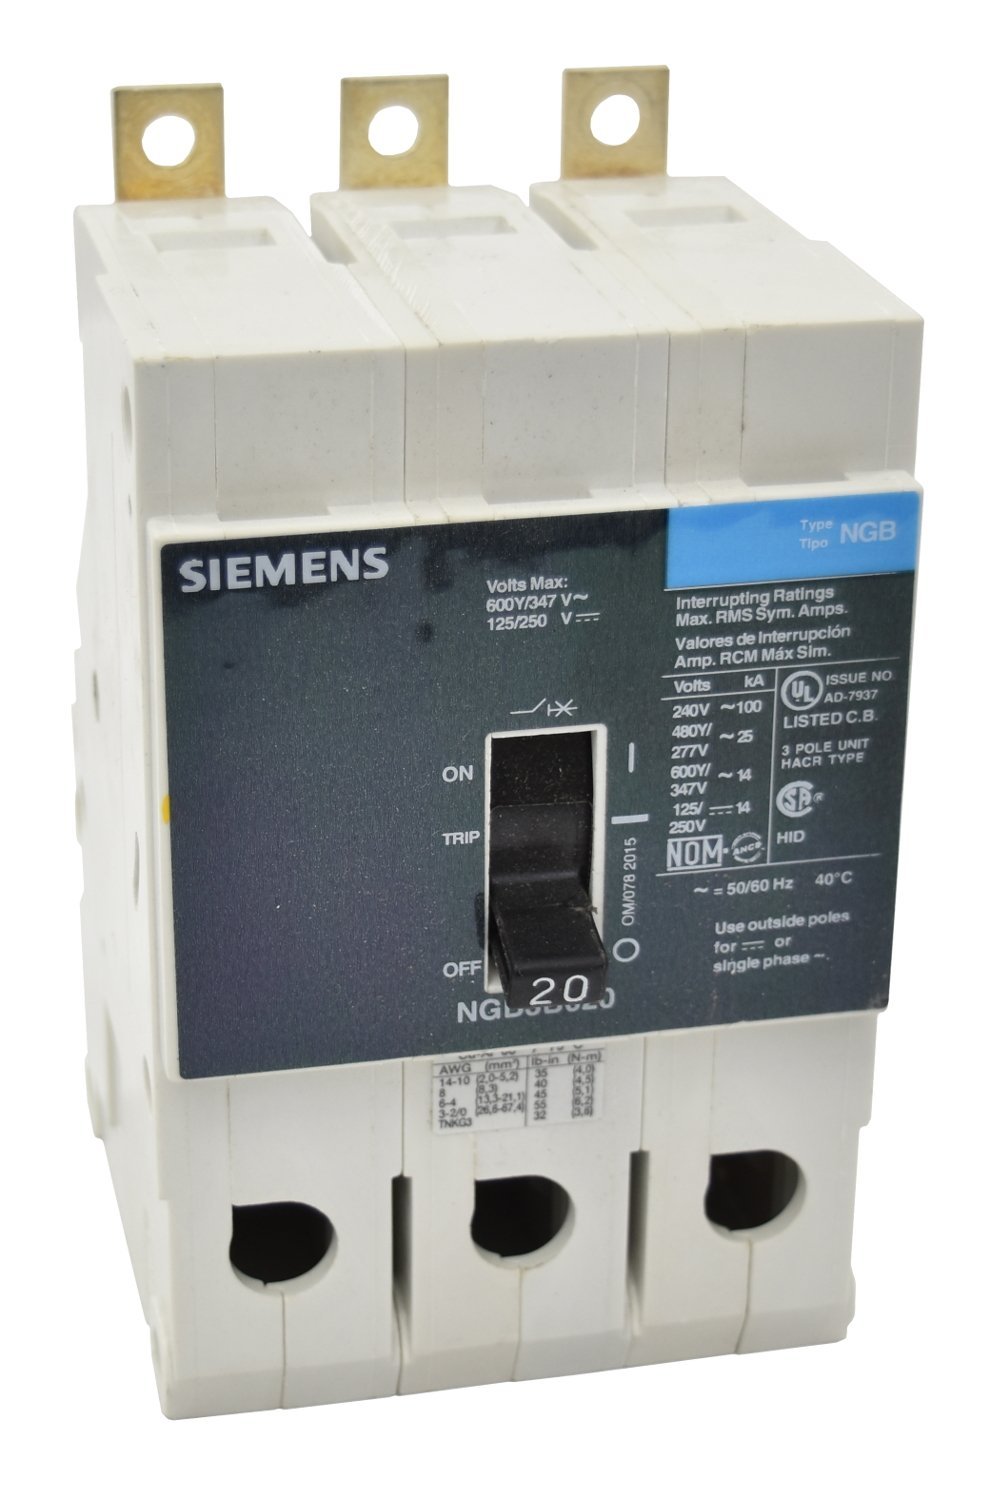 NGB3B070  *New Siemens 70 amp 600 volt circuit breaker Cat# take out* 